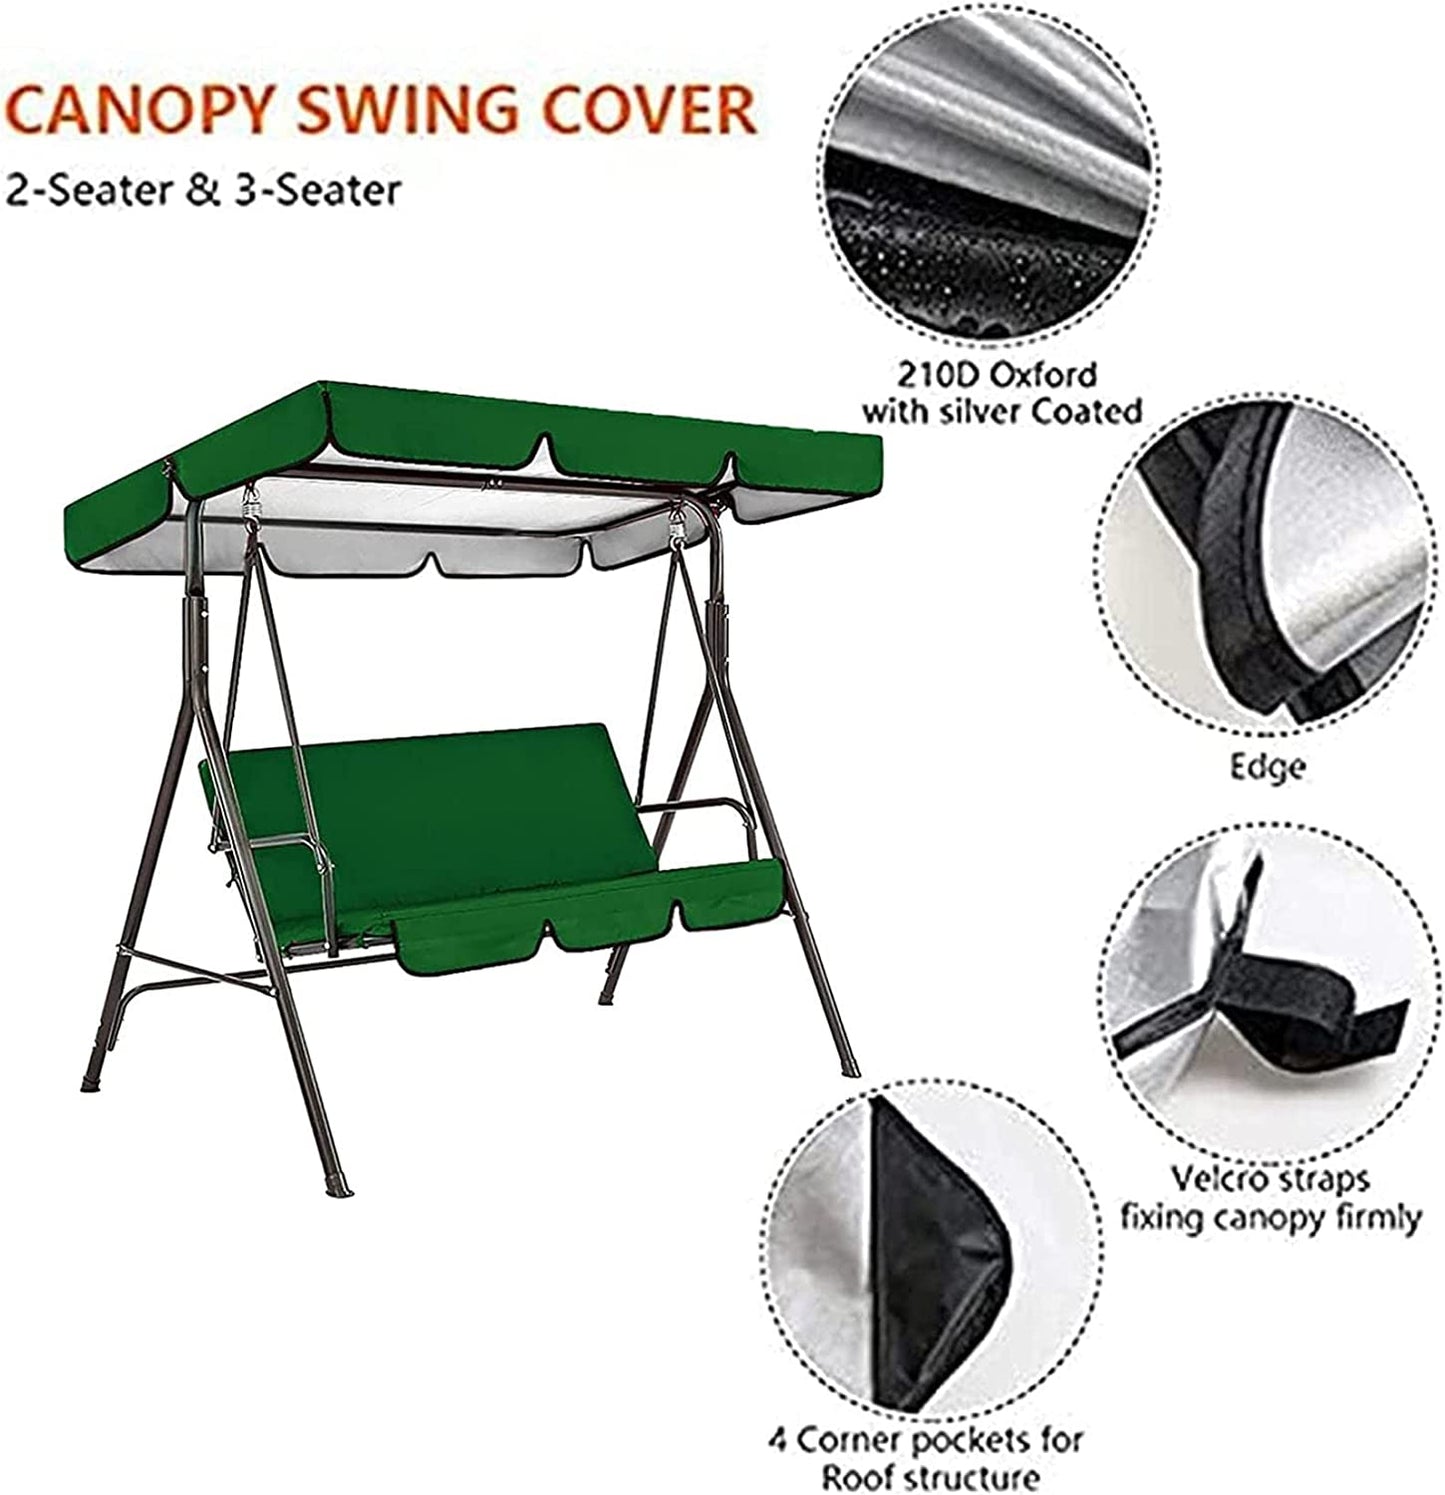 Patio Swing Canopy Waterproof Top Cover Set, Replacement Canopy Cover for Swing Chair Awning Glider 2/3-Seater, Outdoor Garden Furniture Covers All Weather Protection (Blue, Three-Seater)